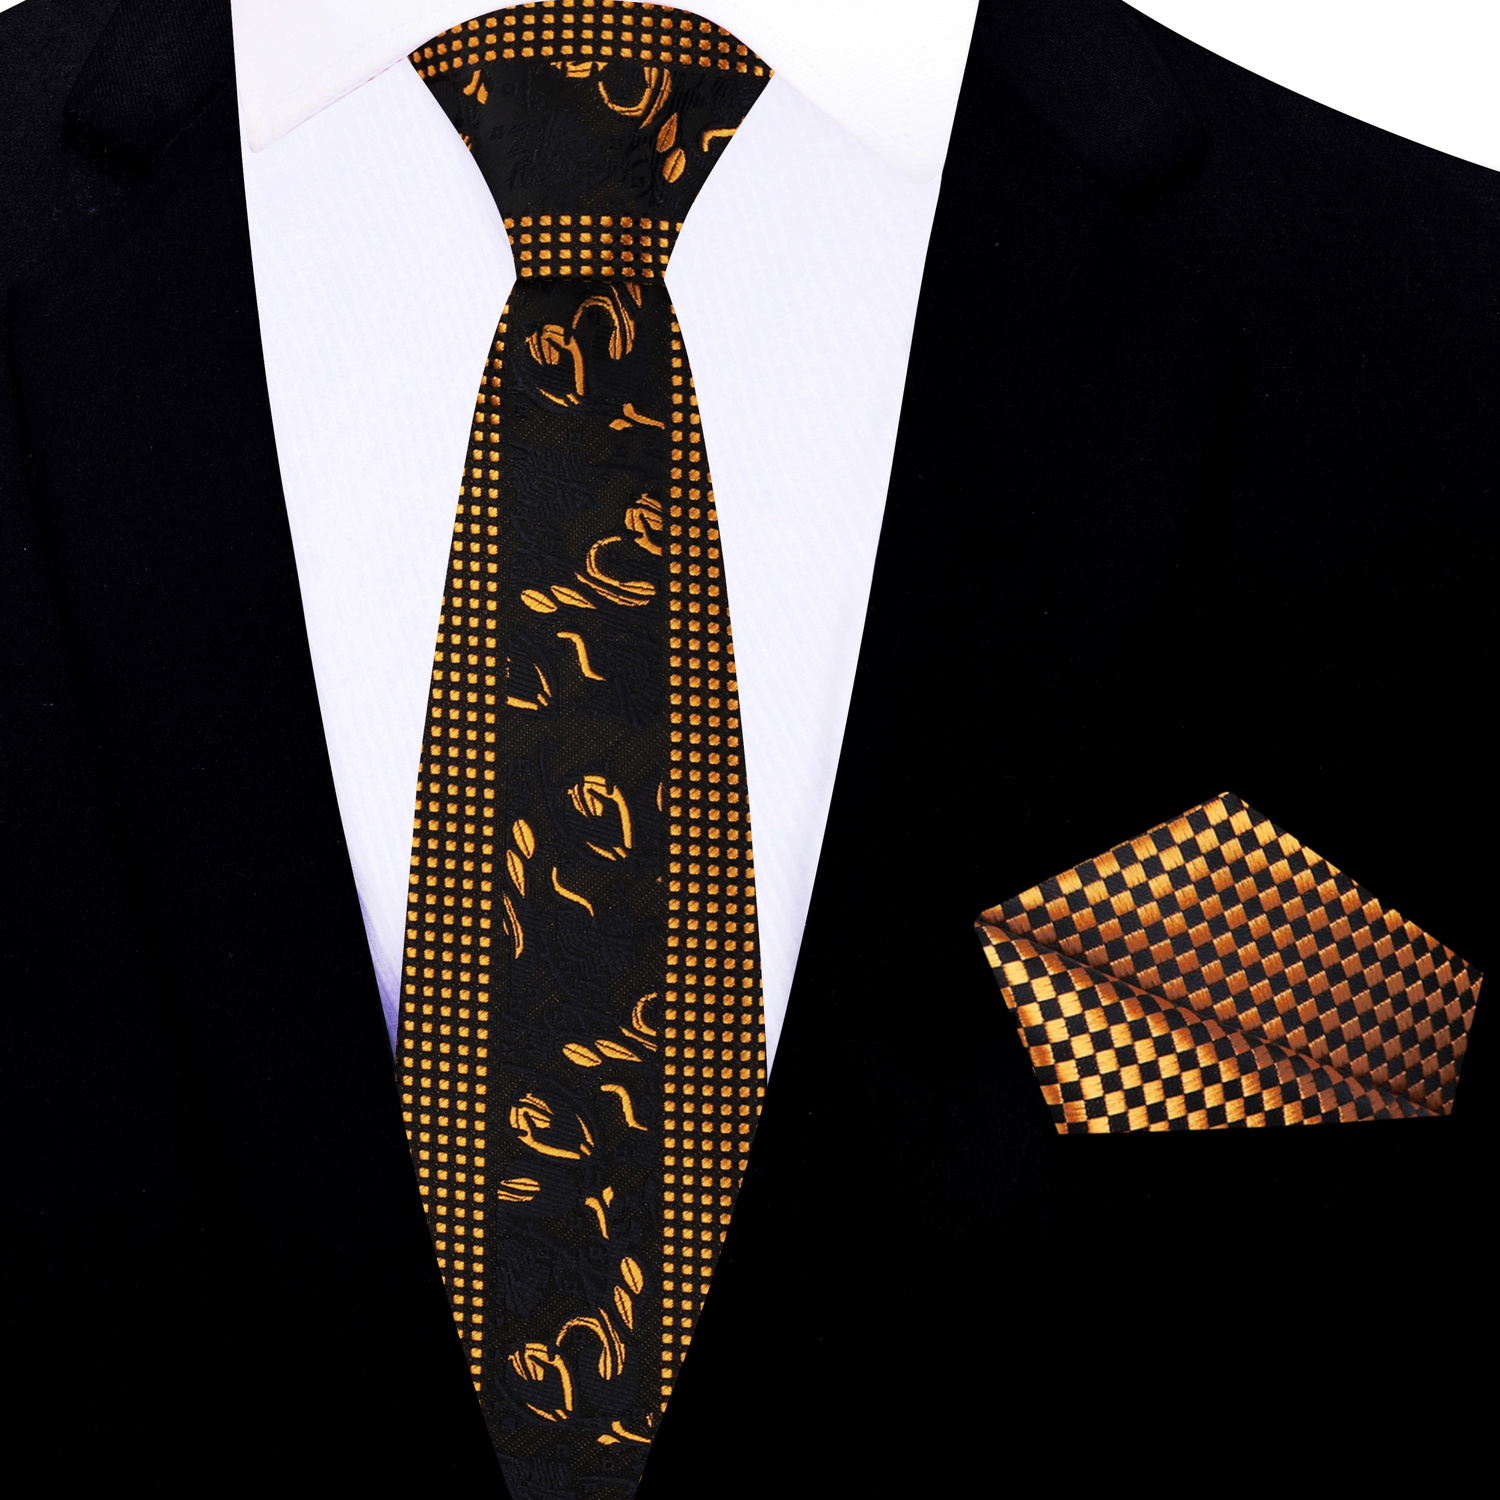 Thin Tie: Black & Gold Floral and Check Necktie with Black, Gold Check Square